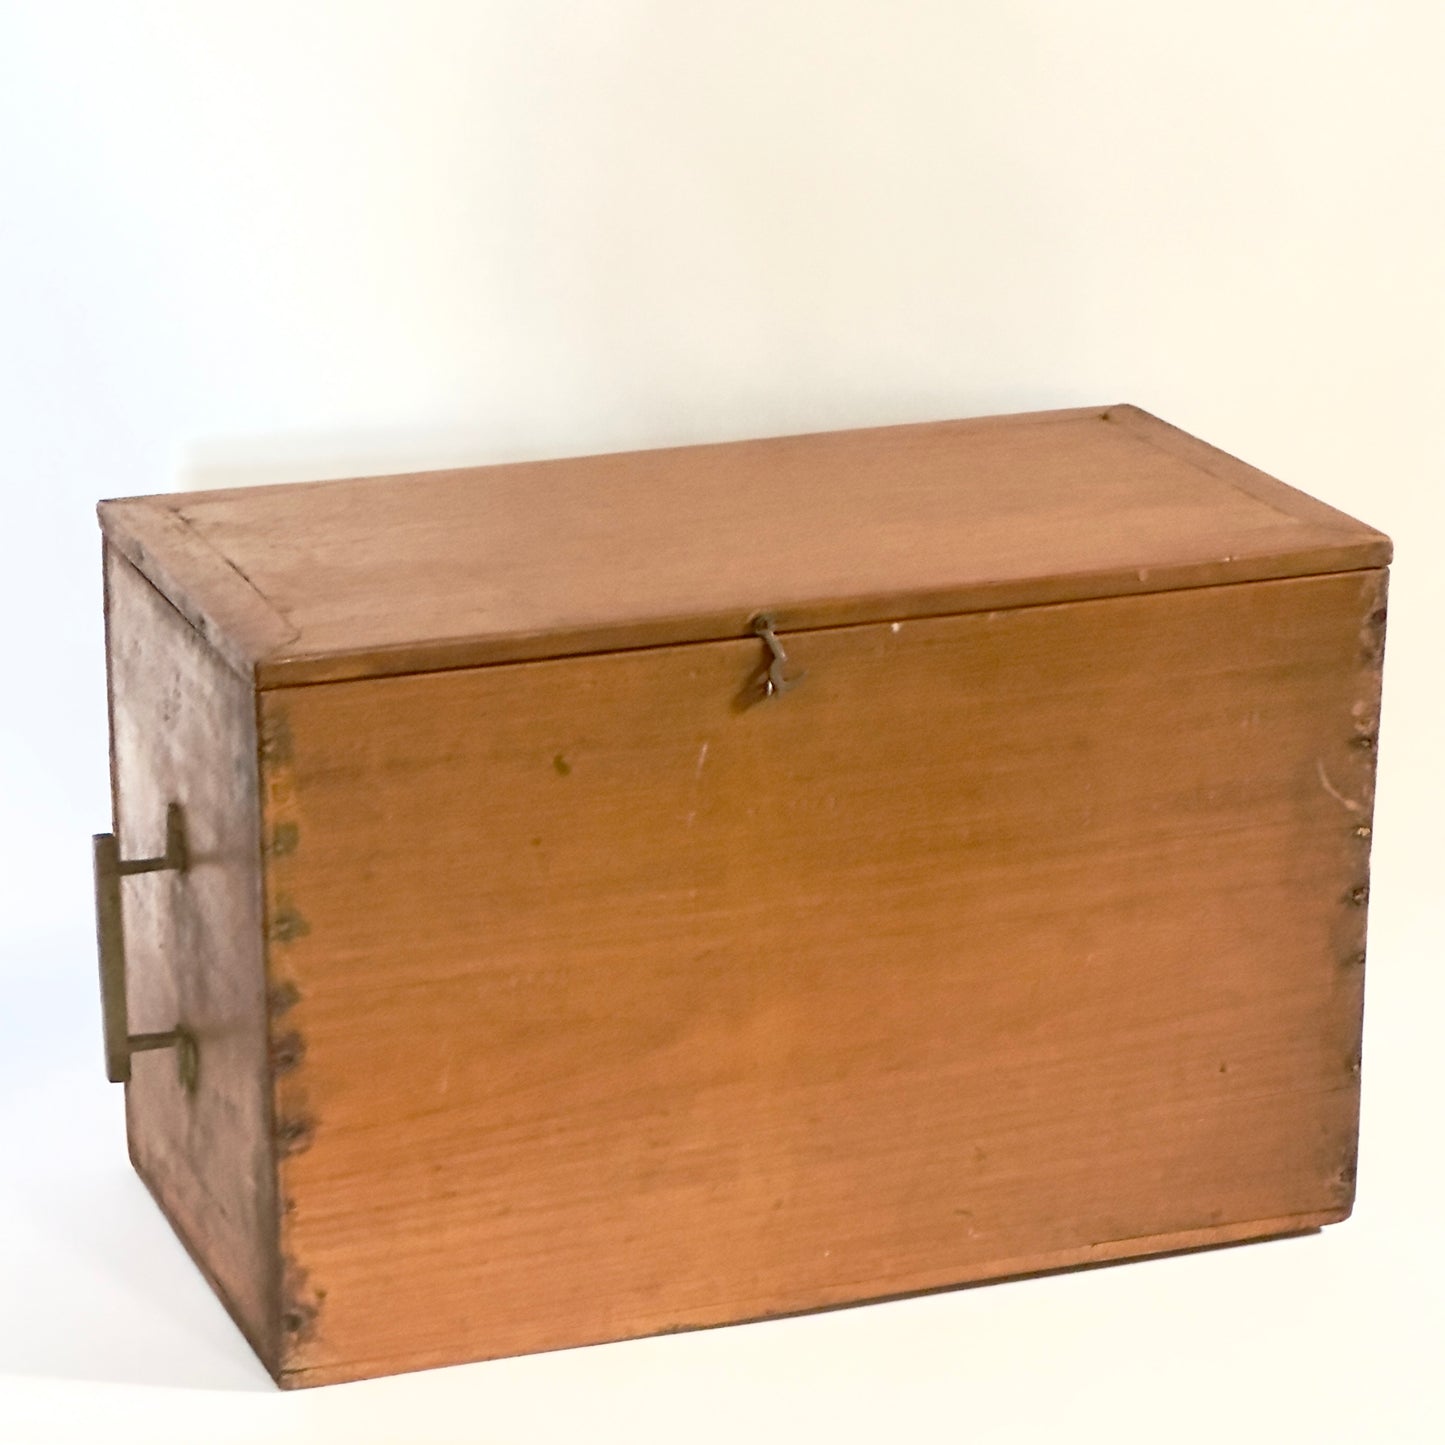 Wooden box with side handle